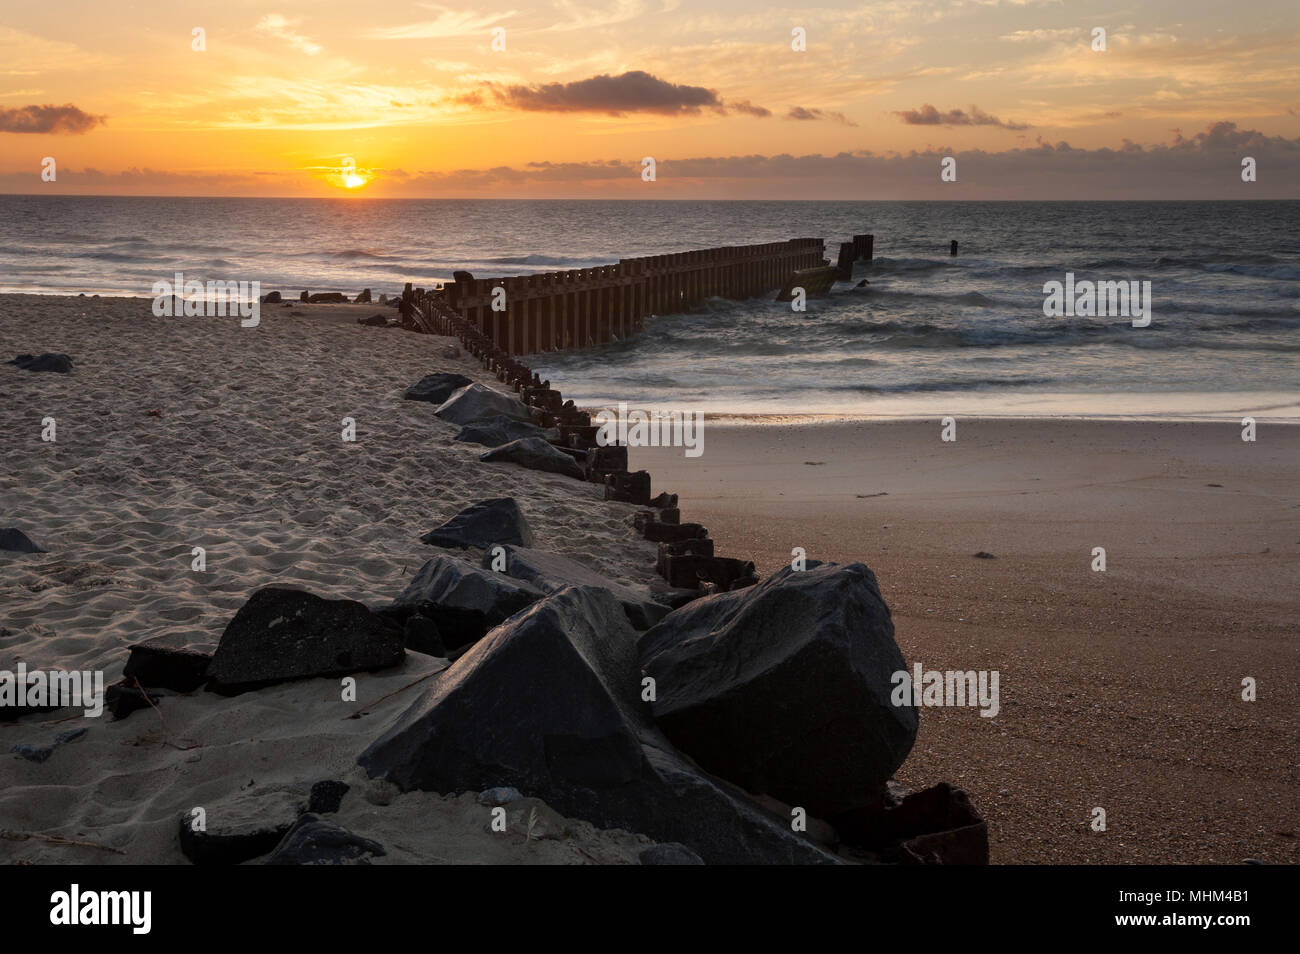 NC01614-00...NORTH CAROLINA - Sunrise from the beach at Cape Hatteras Lighthouse in Buxton on the Outer Banks, Cape Hatteras National Seashore. Stock Photo